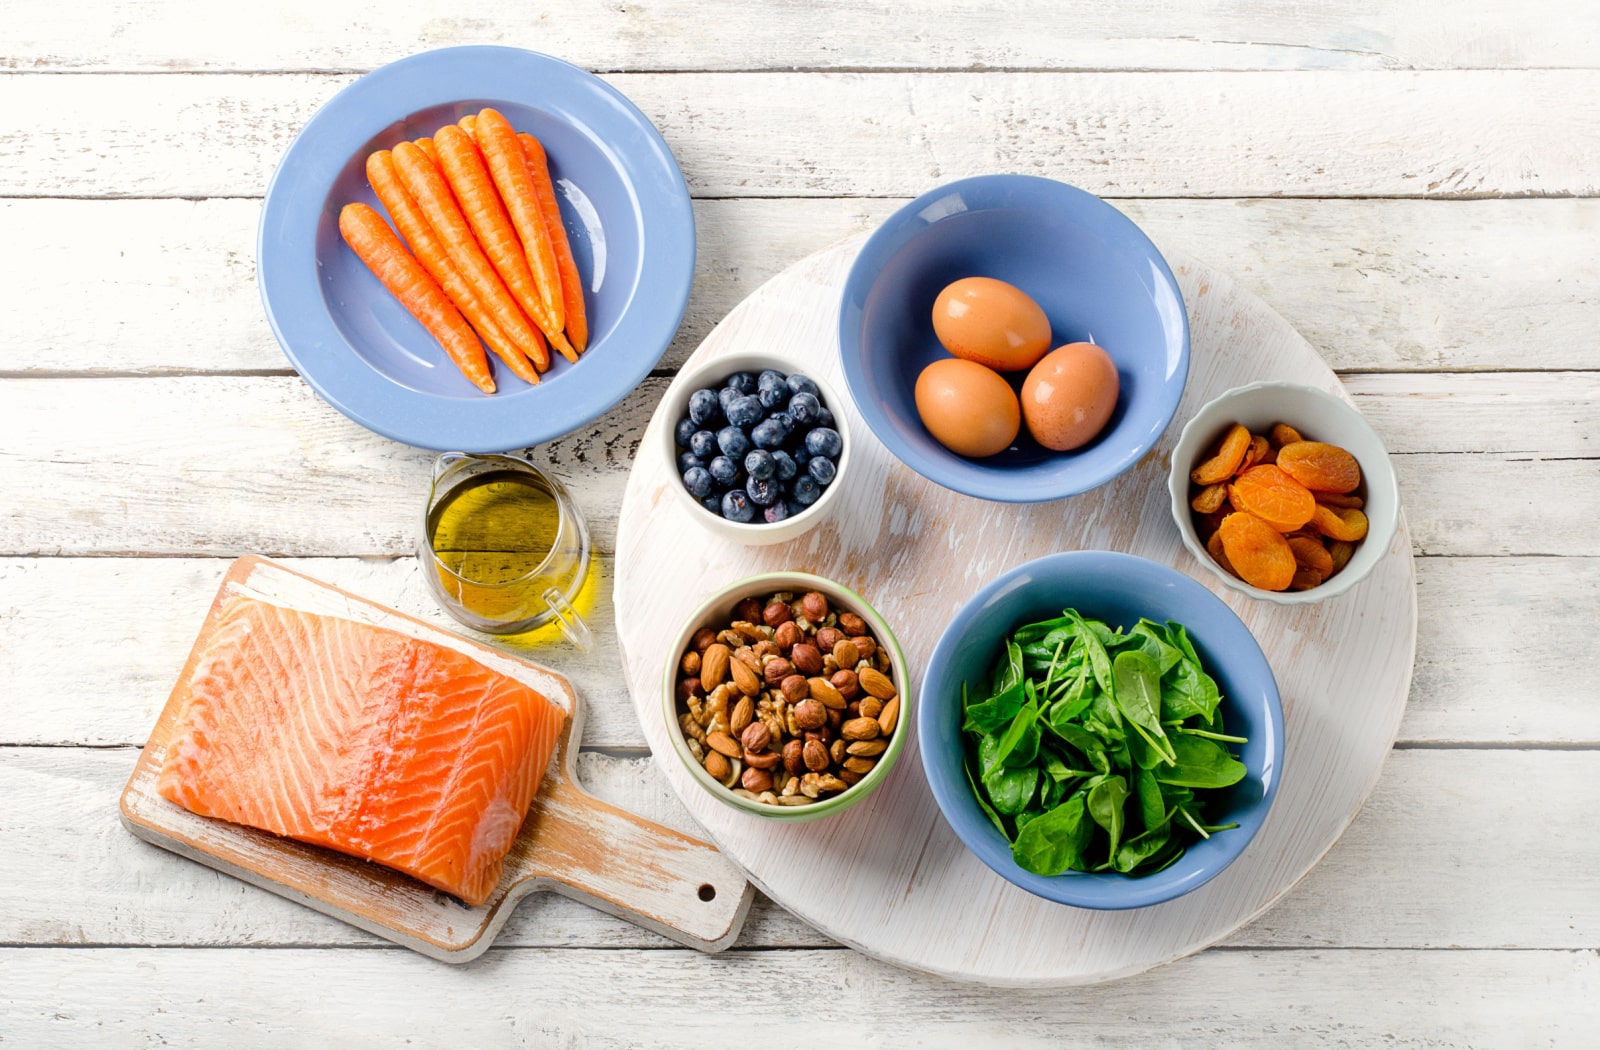 A variety of eye-healthy foods sitting out on a table, including salmon, blueberries, nuts, spinach, dried apricots, eggs, carrots and oils.